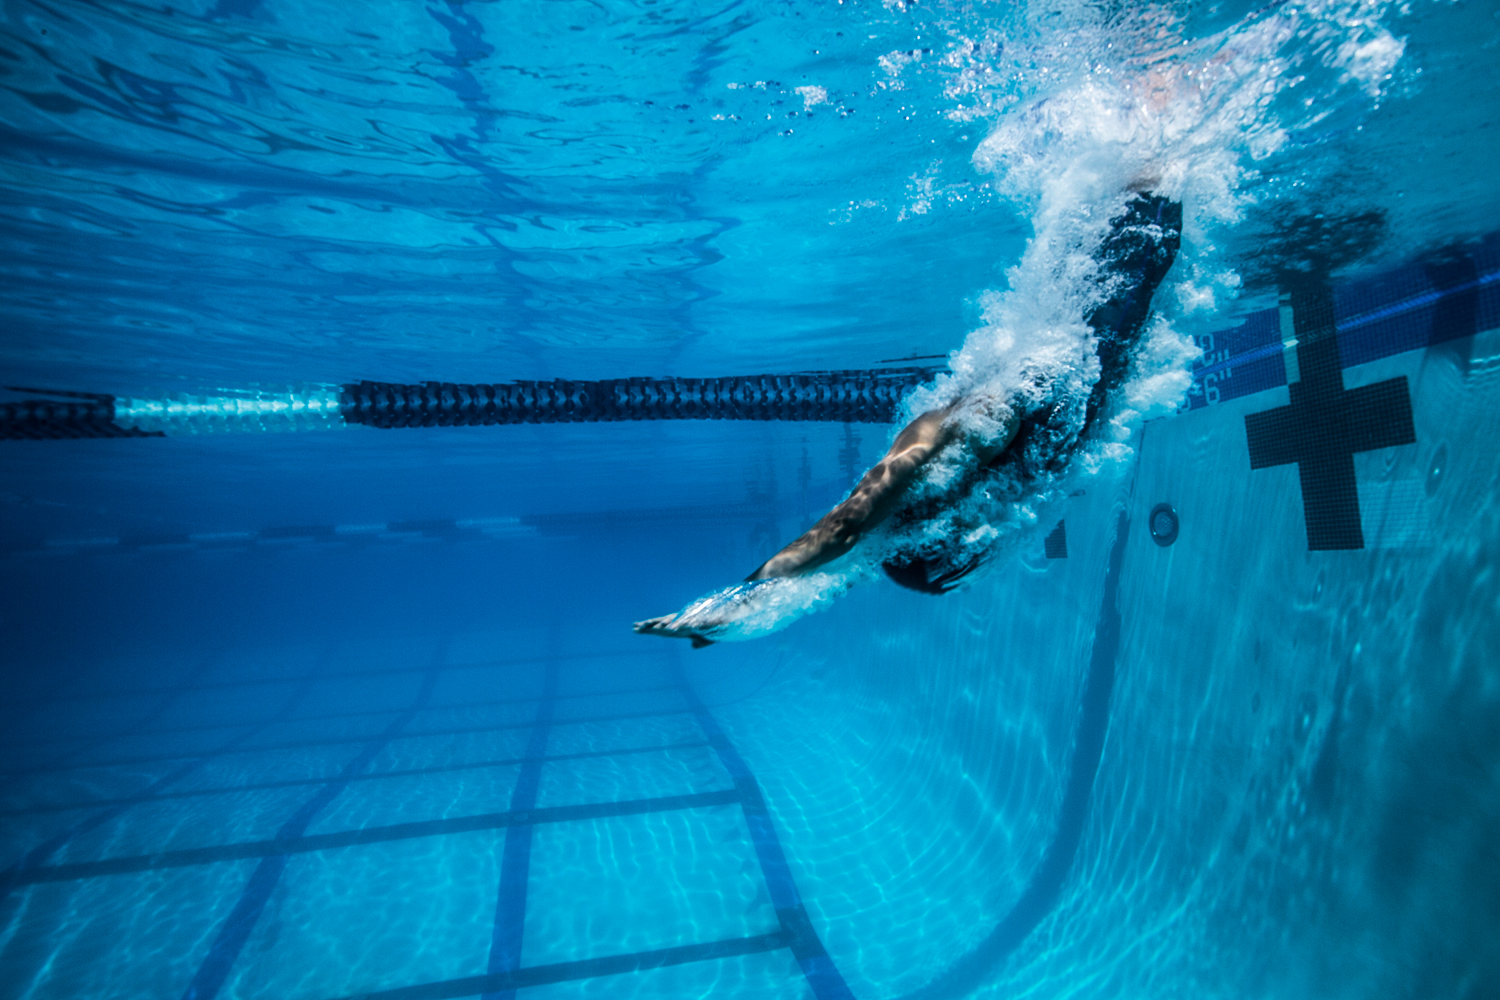 underwater photography showing a swimmer as they dive into a pool